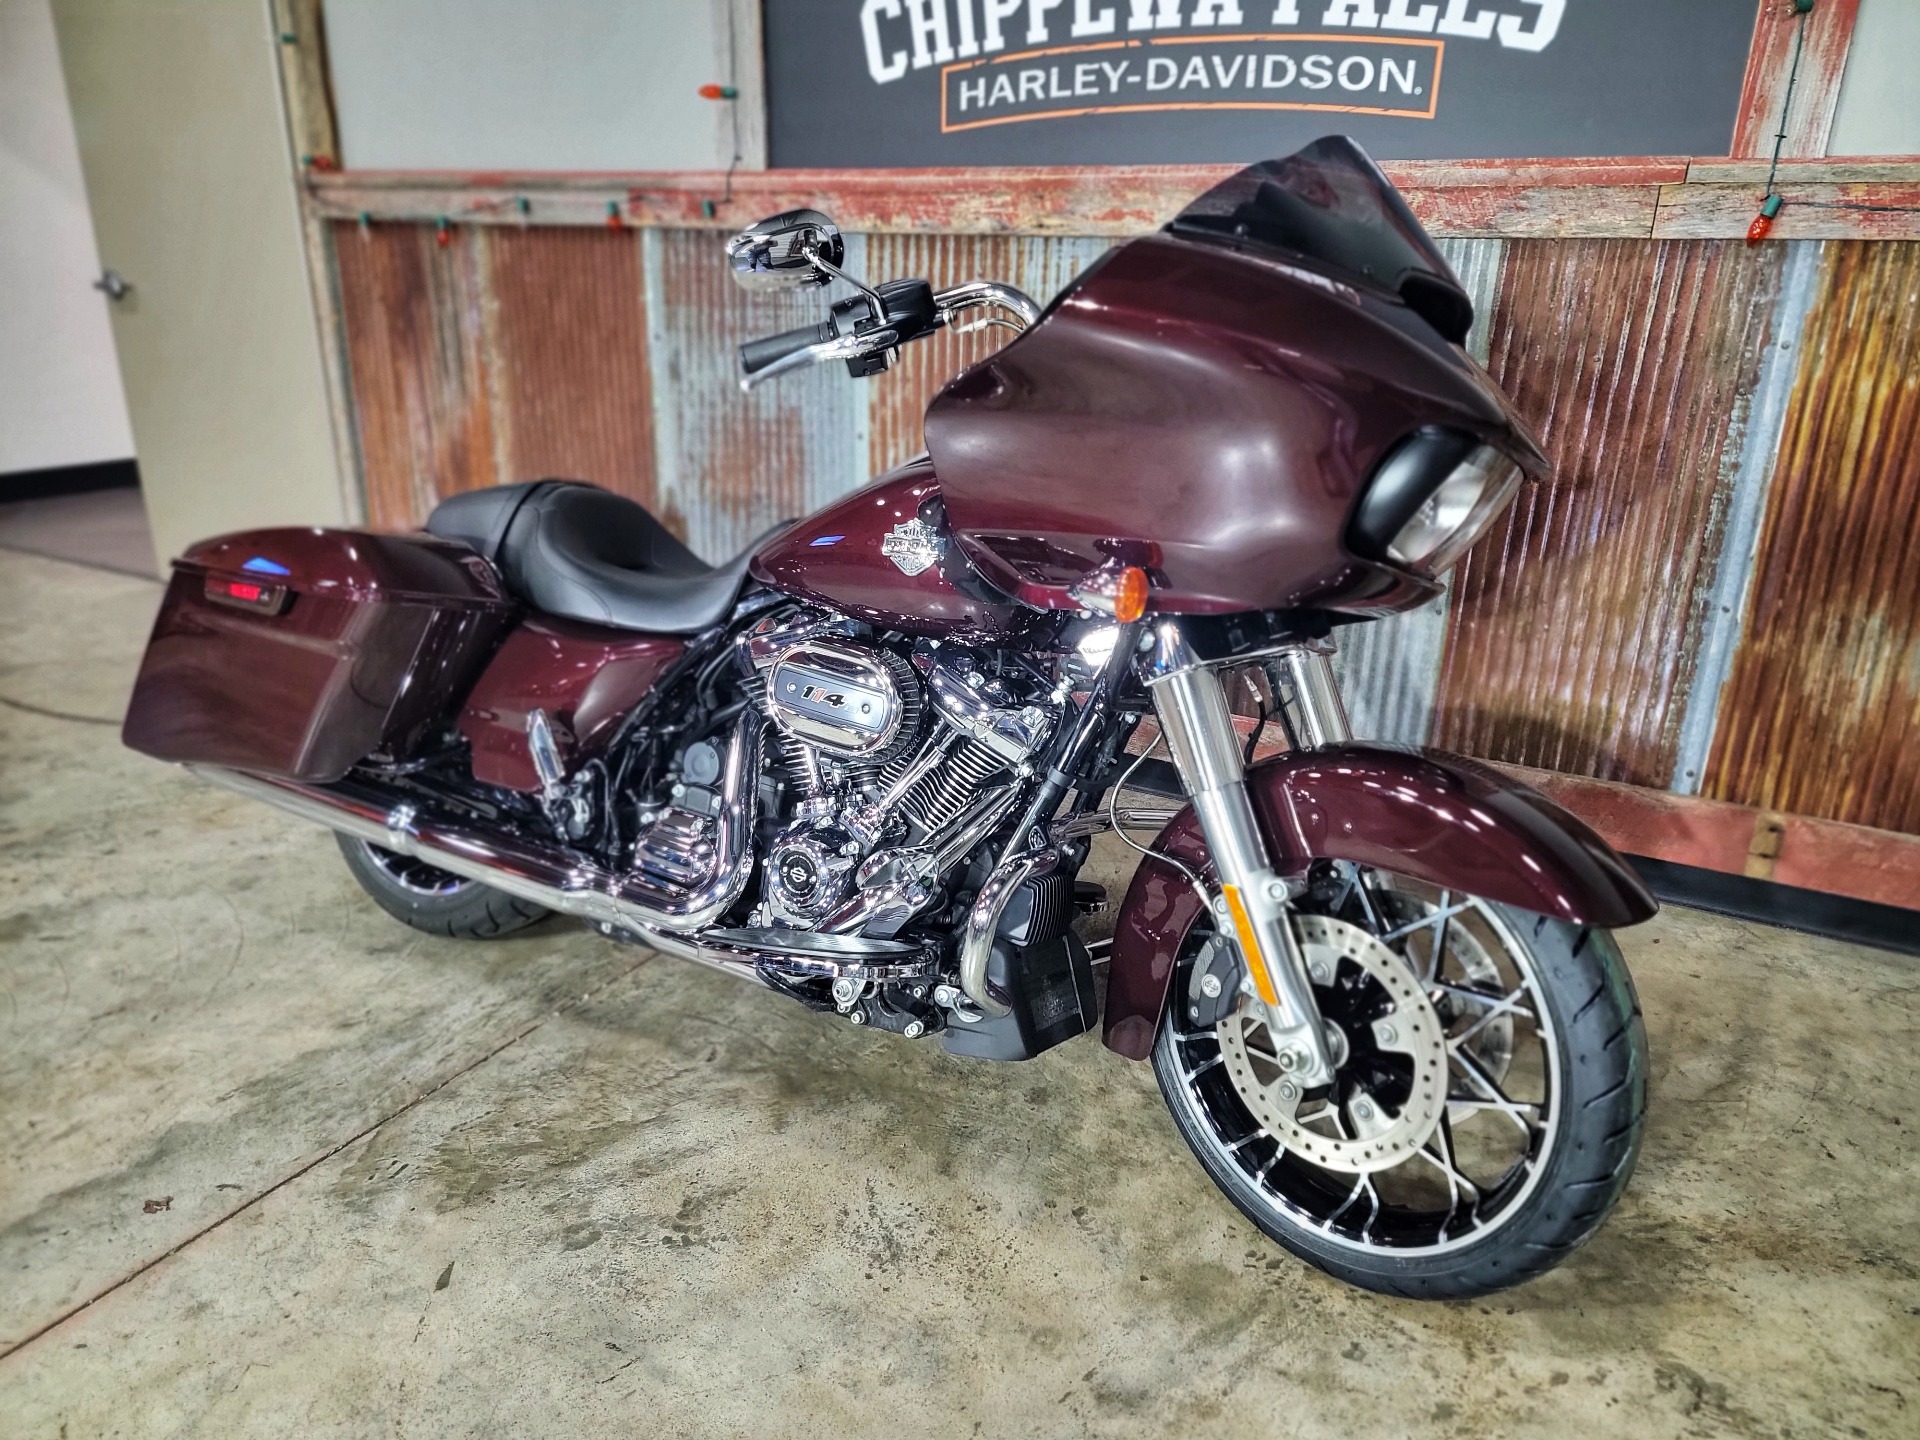 2021 Harley-Davidson Road Glide® Special in Chippewa Falls, Wisconsin - Photo 4